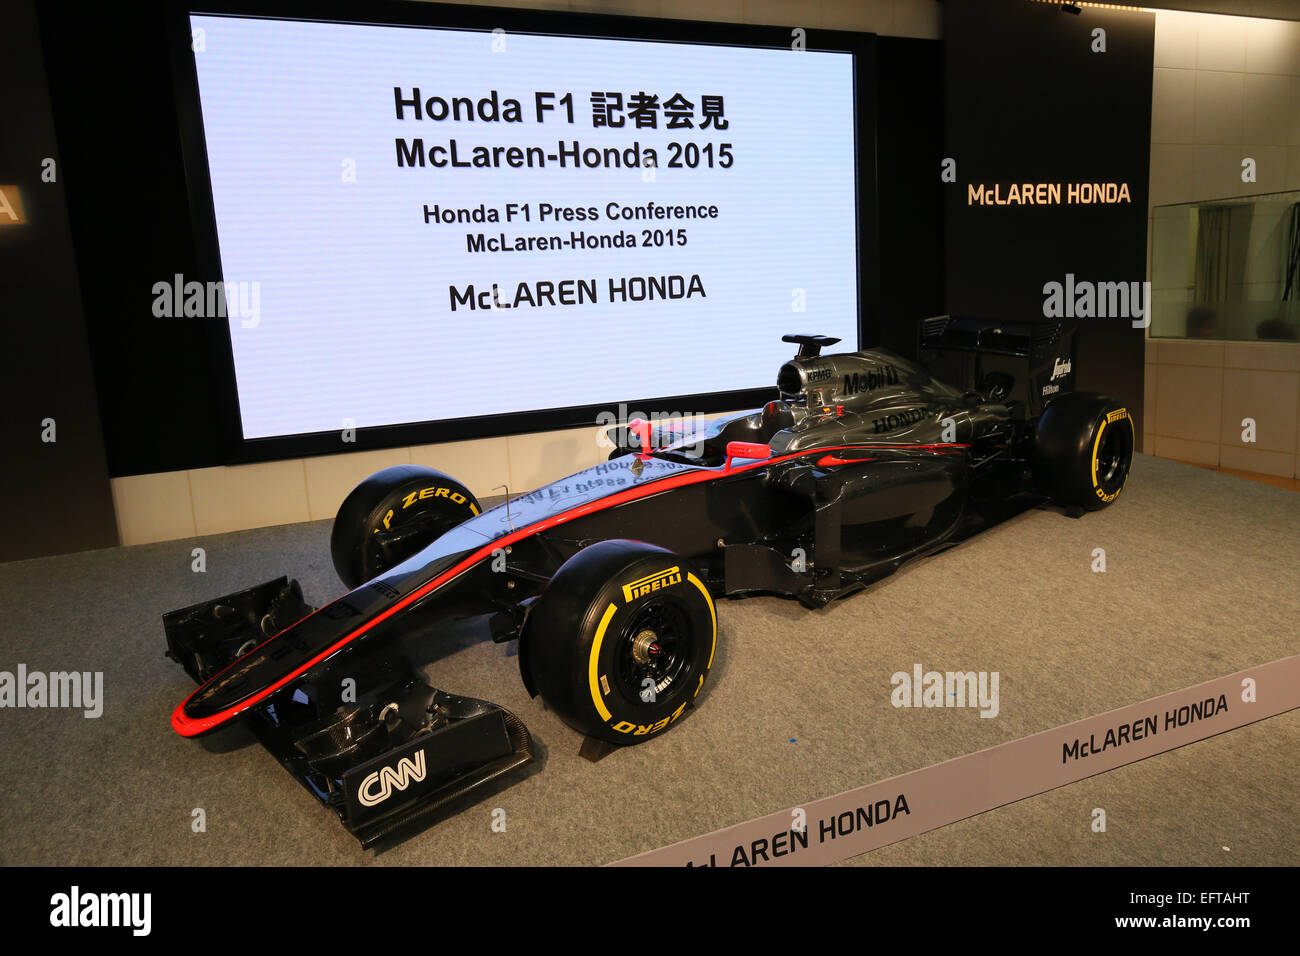 Tokyo, Japan. 10th Feb, 2015. McLaren Honda MP4-30 F1 : The McLaren Honda  MP4-30 F1 Car for 2015 on display during a press conference at the Honda  Motor Co. headquarters in Tokyo,